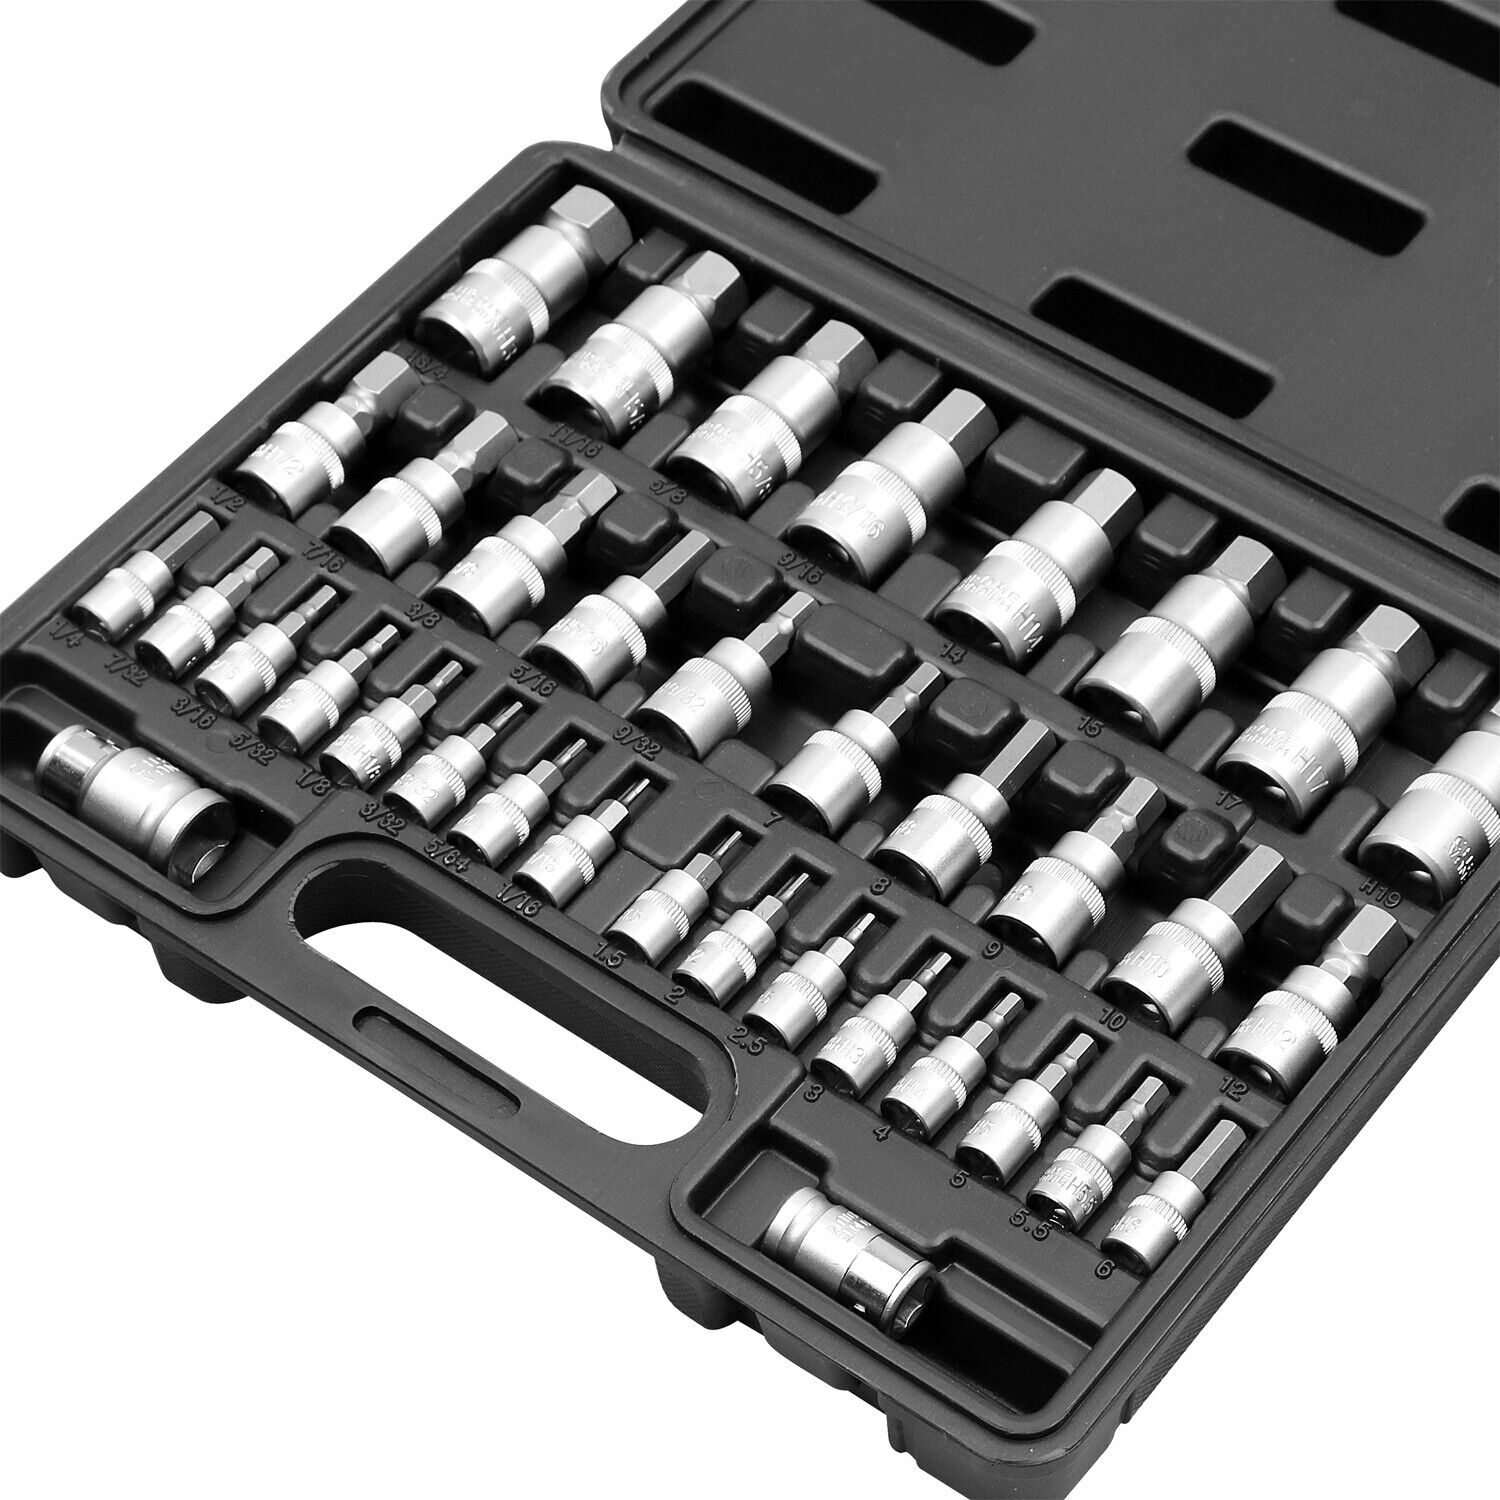 36-Piece Hex Bit Socket Set with S2 Steel Bits. Premium materials. Rugged strength. Versatile and organized. Ideal for repairs.